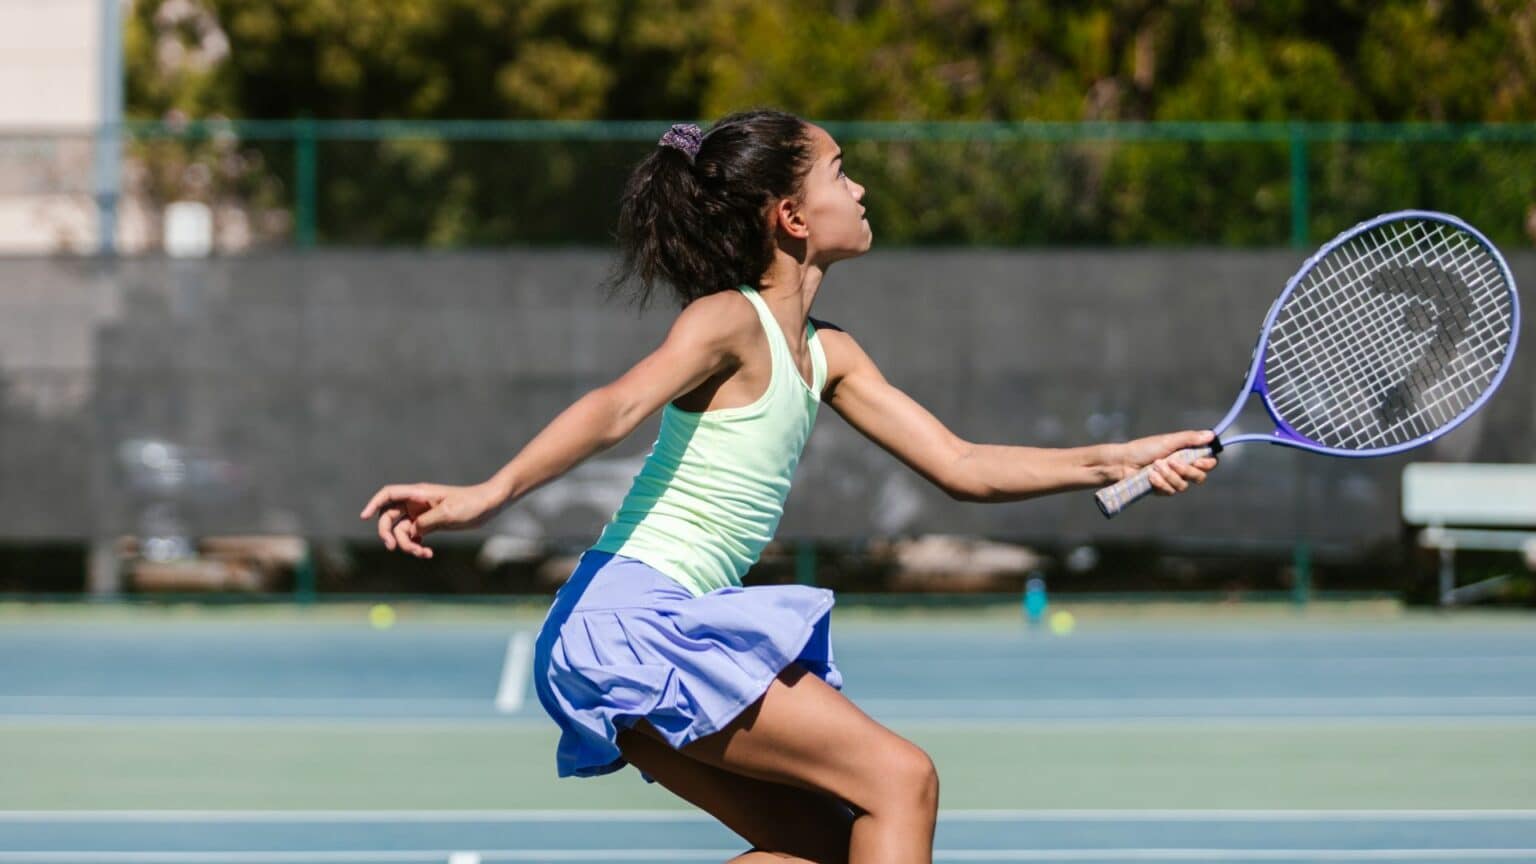 How can you make tennis fun even if your kid isn't very good